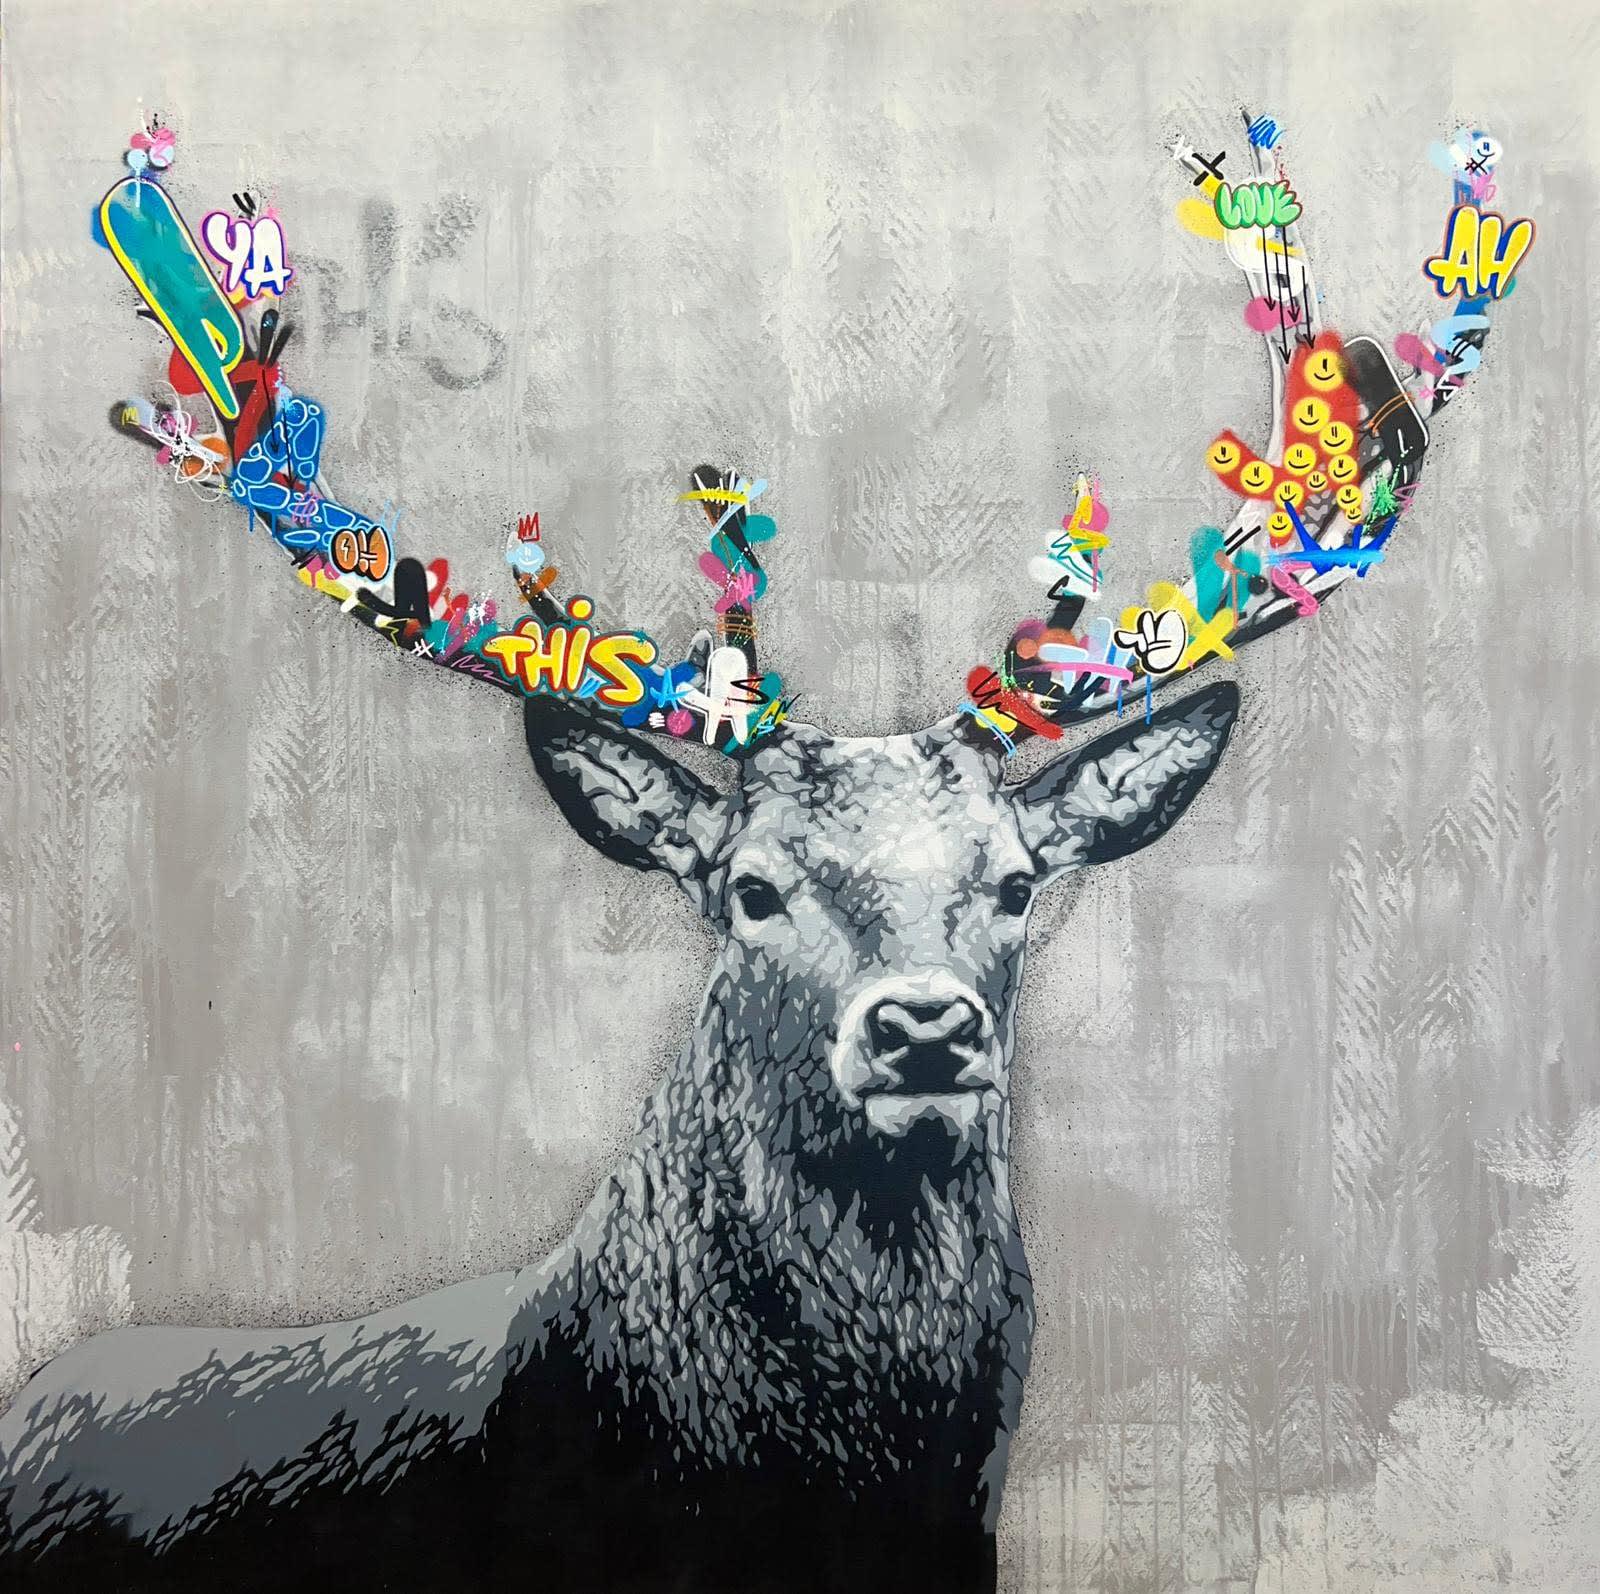 Martin Whatson, The Stag, 2022 | Harman Projects